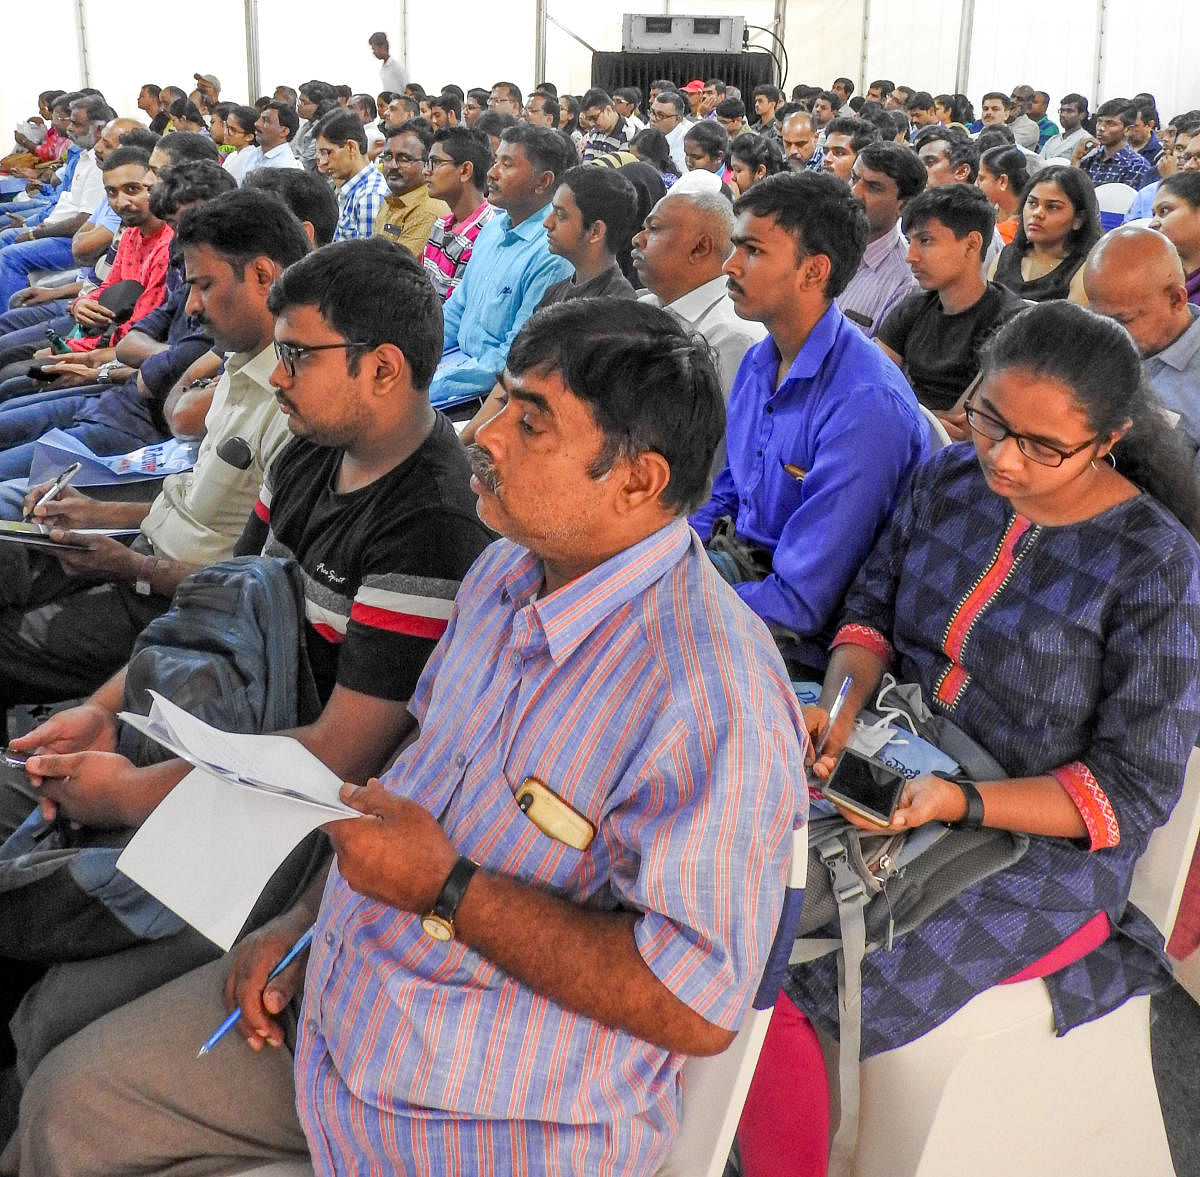 Parents and students note down guidance provided by experts at the 11th edition of Eduverse-Jnanadegula annual education fair organised by Deccan Herald and Prajavani in the city on Sunday. DH photo/Srilekha R